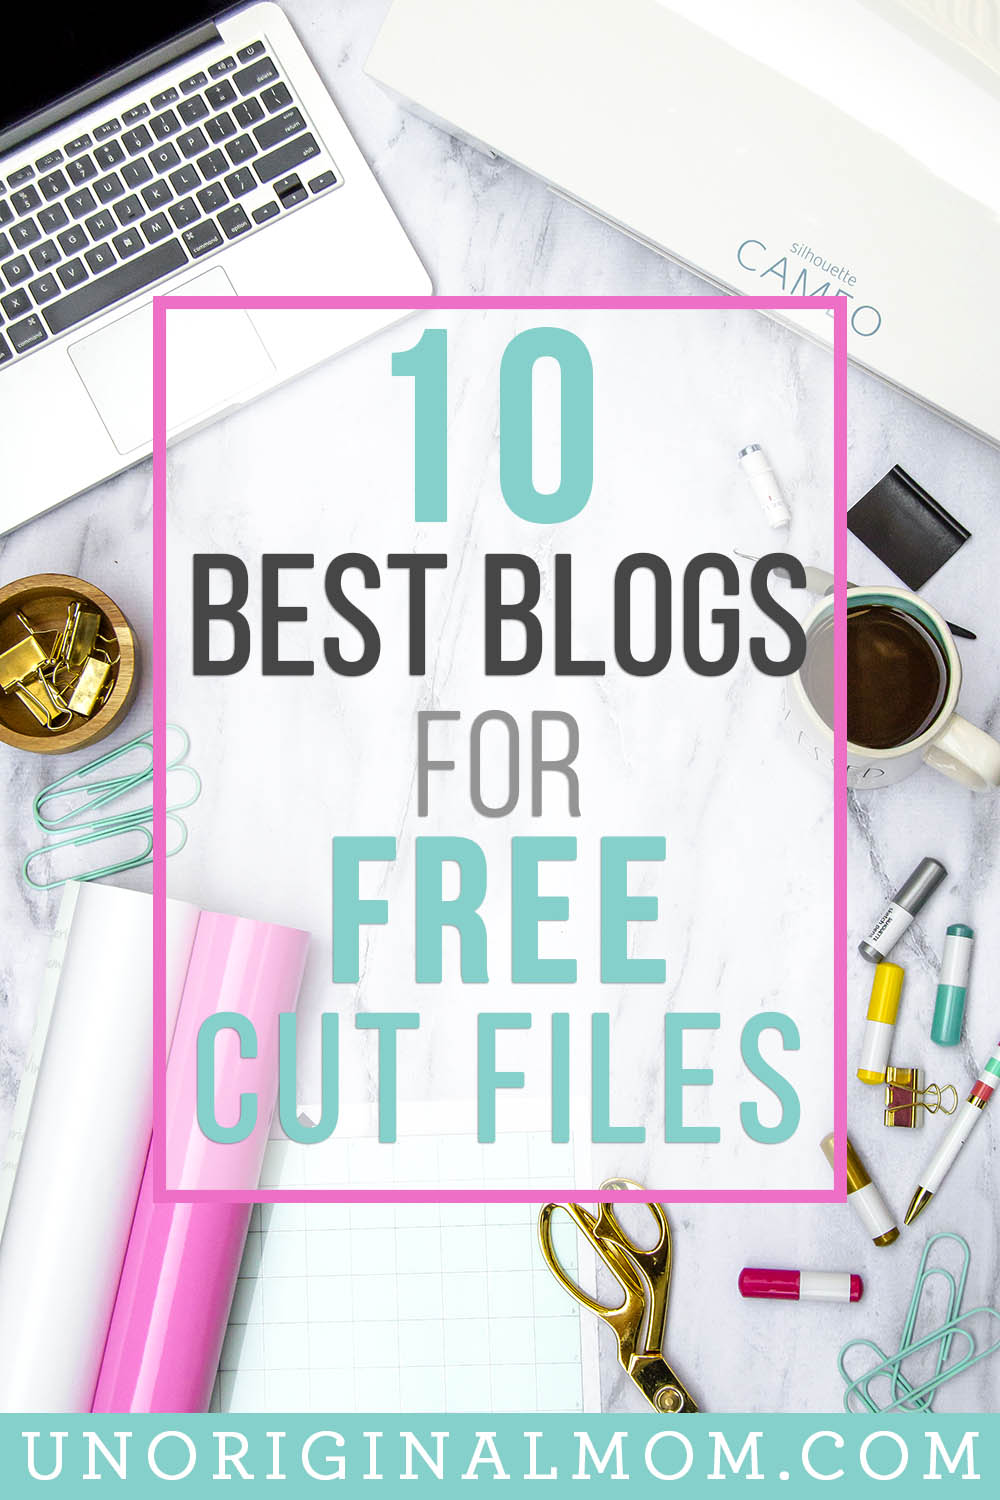 Looking for the best Silhouette & Cricut bloggers who offer amazing free cut files? Here's a list of the 10 best blogs for free cut files & SVGs.